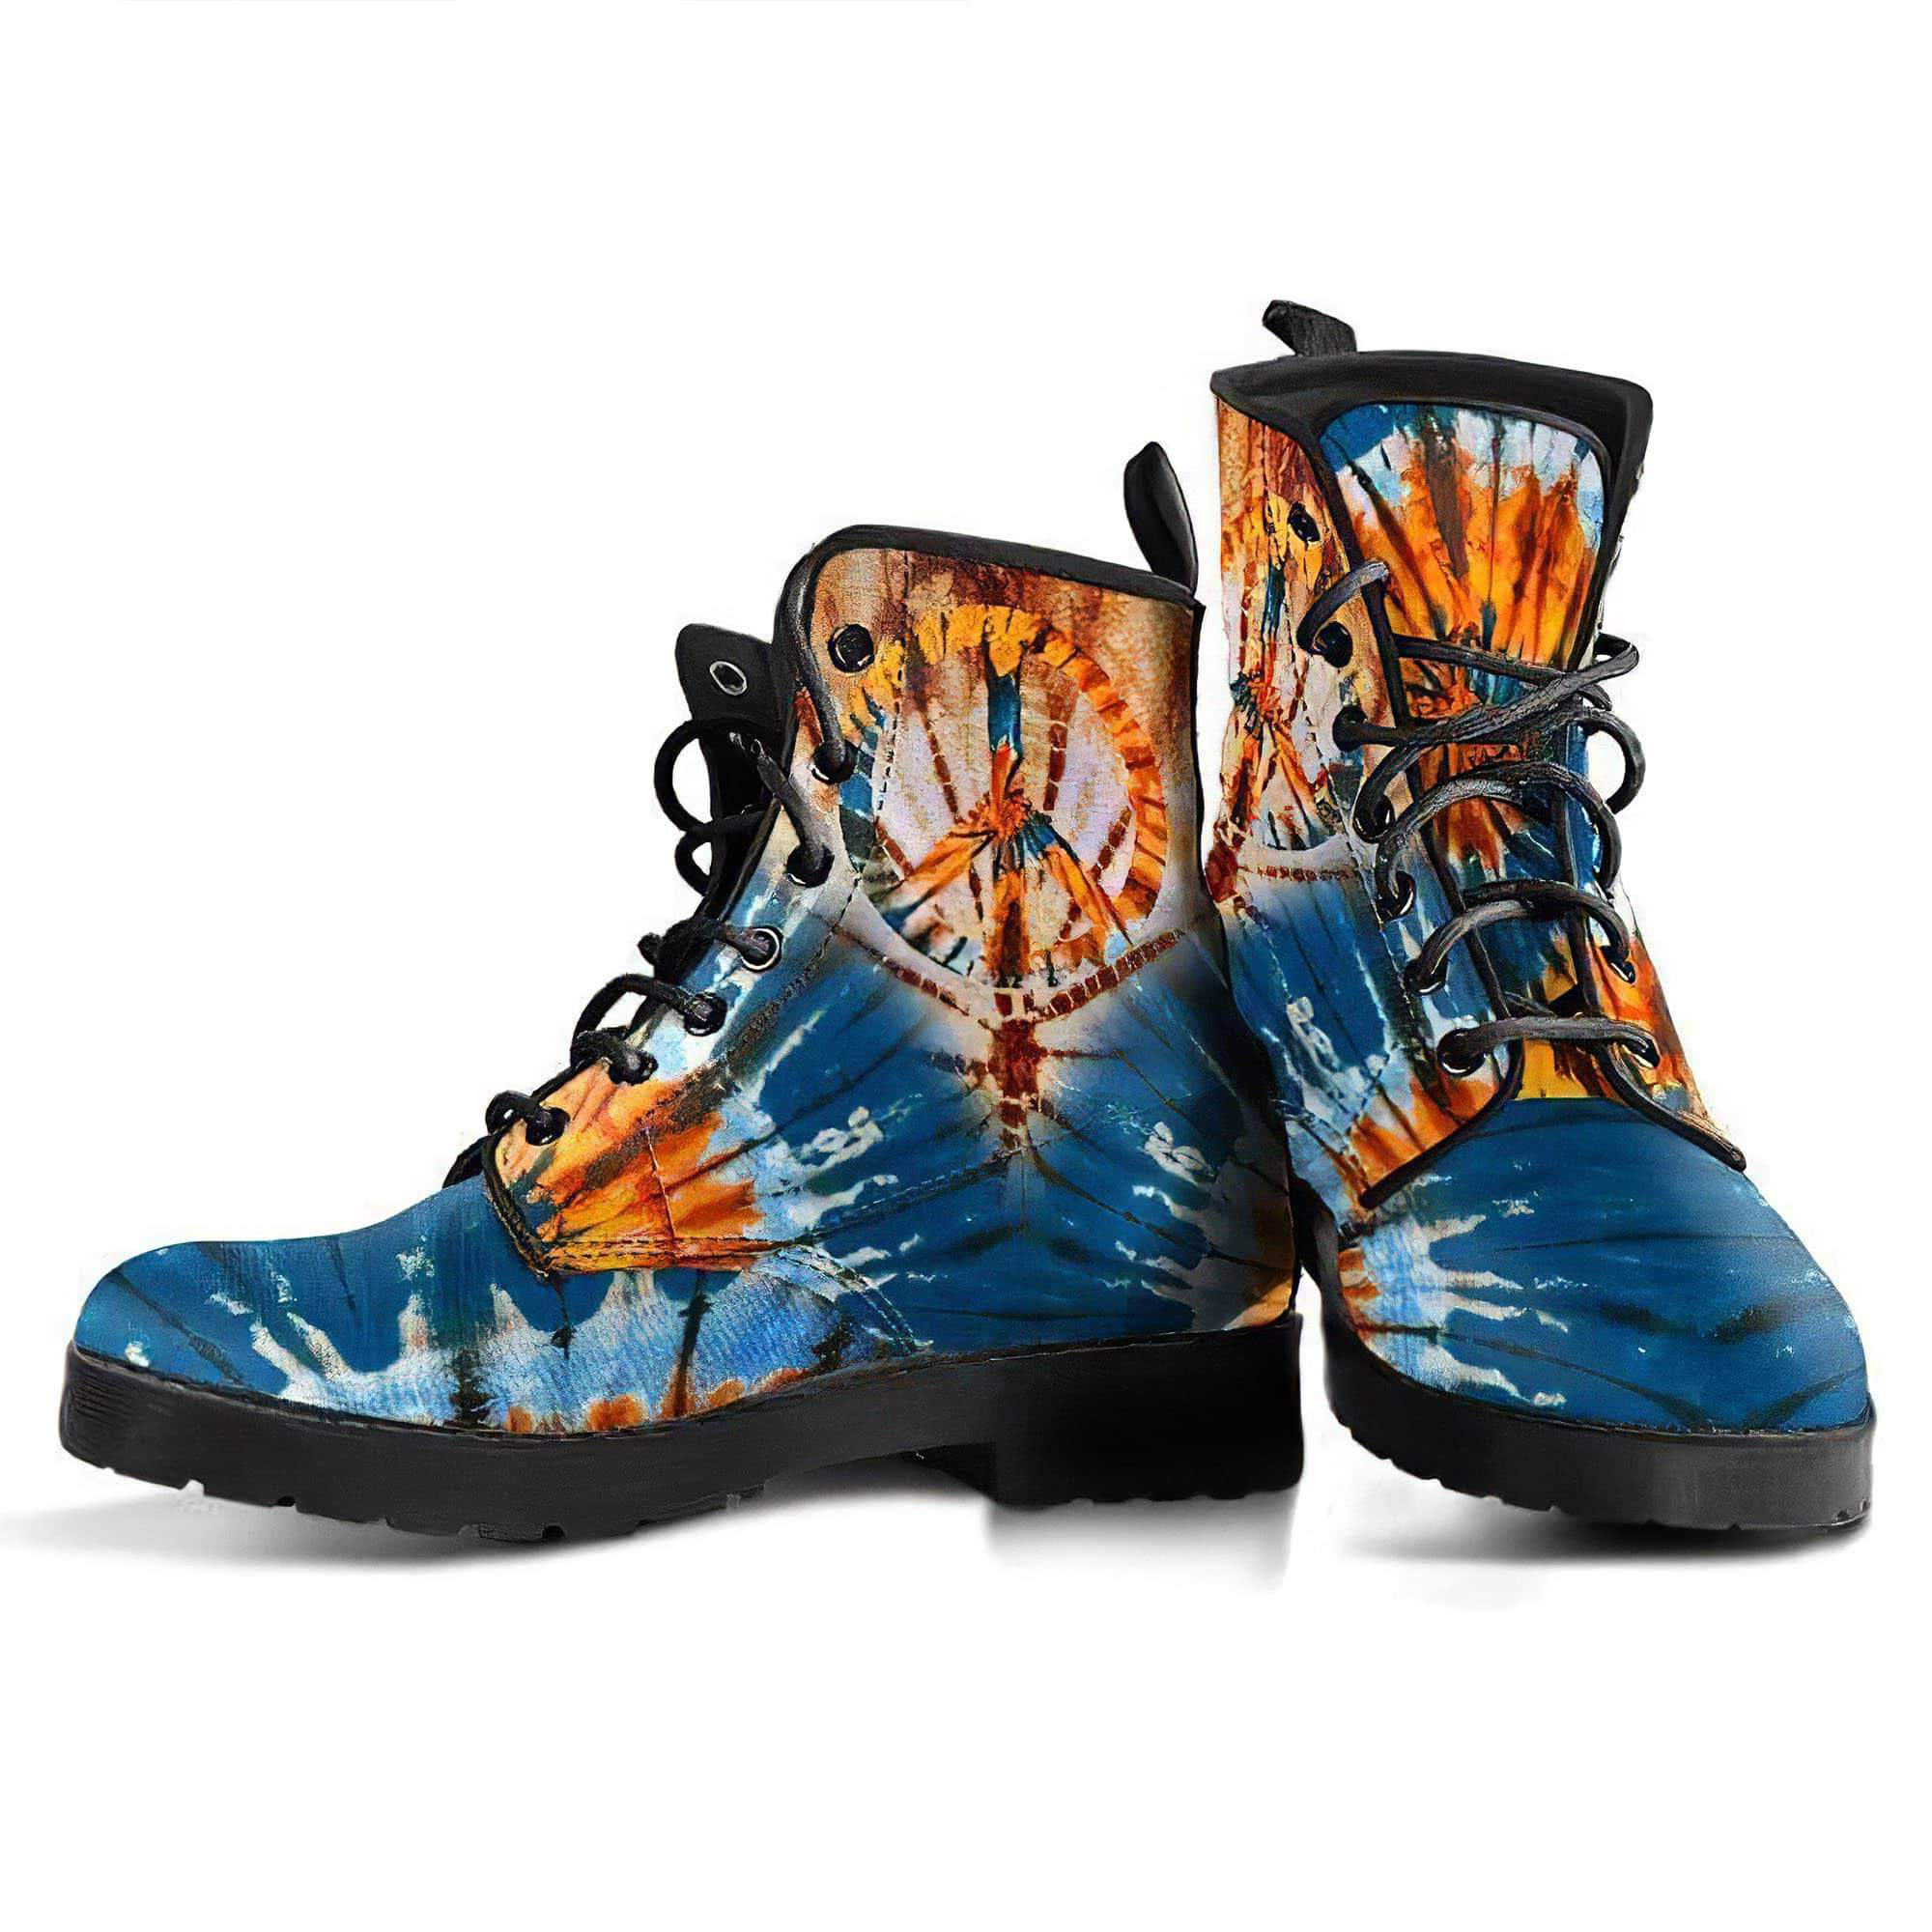 tie-dye-peace-handcrafted-boots-women-s-leather-boots-12051966132285.jpg